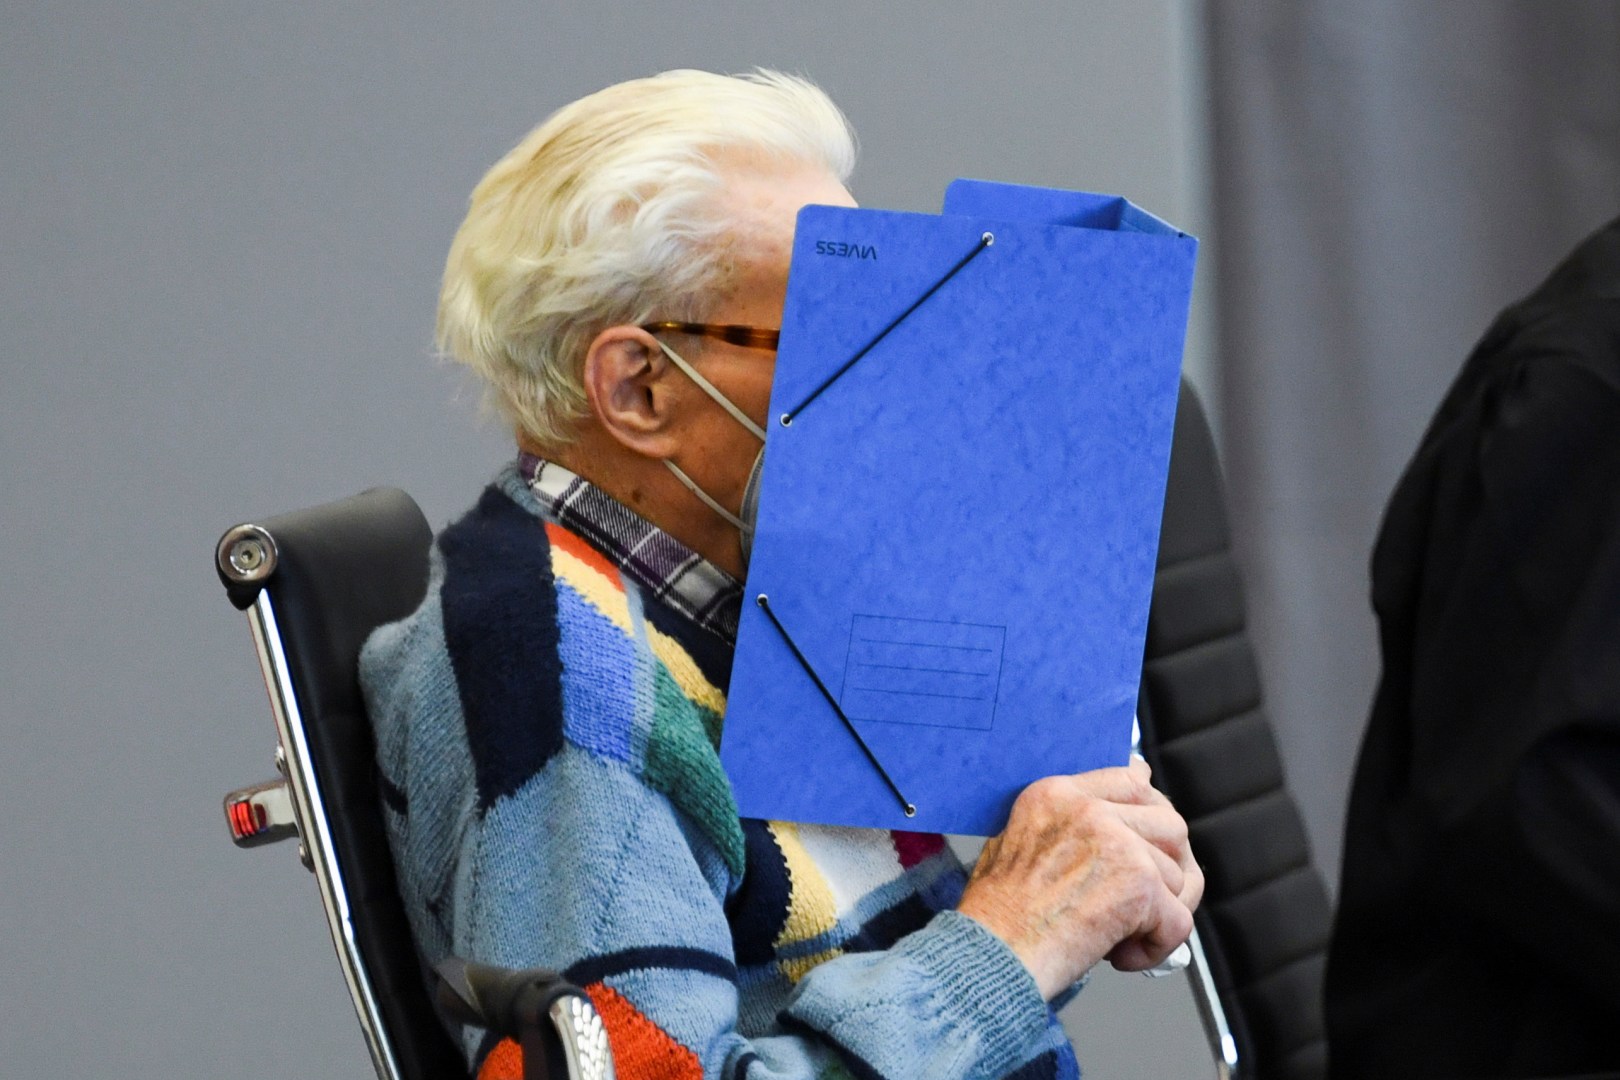 A former concentration camp guard declared his innocence Friday.